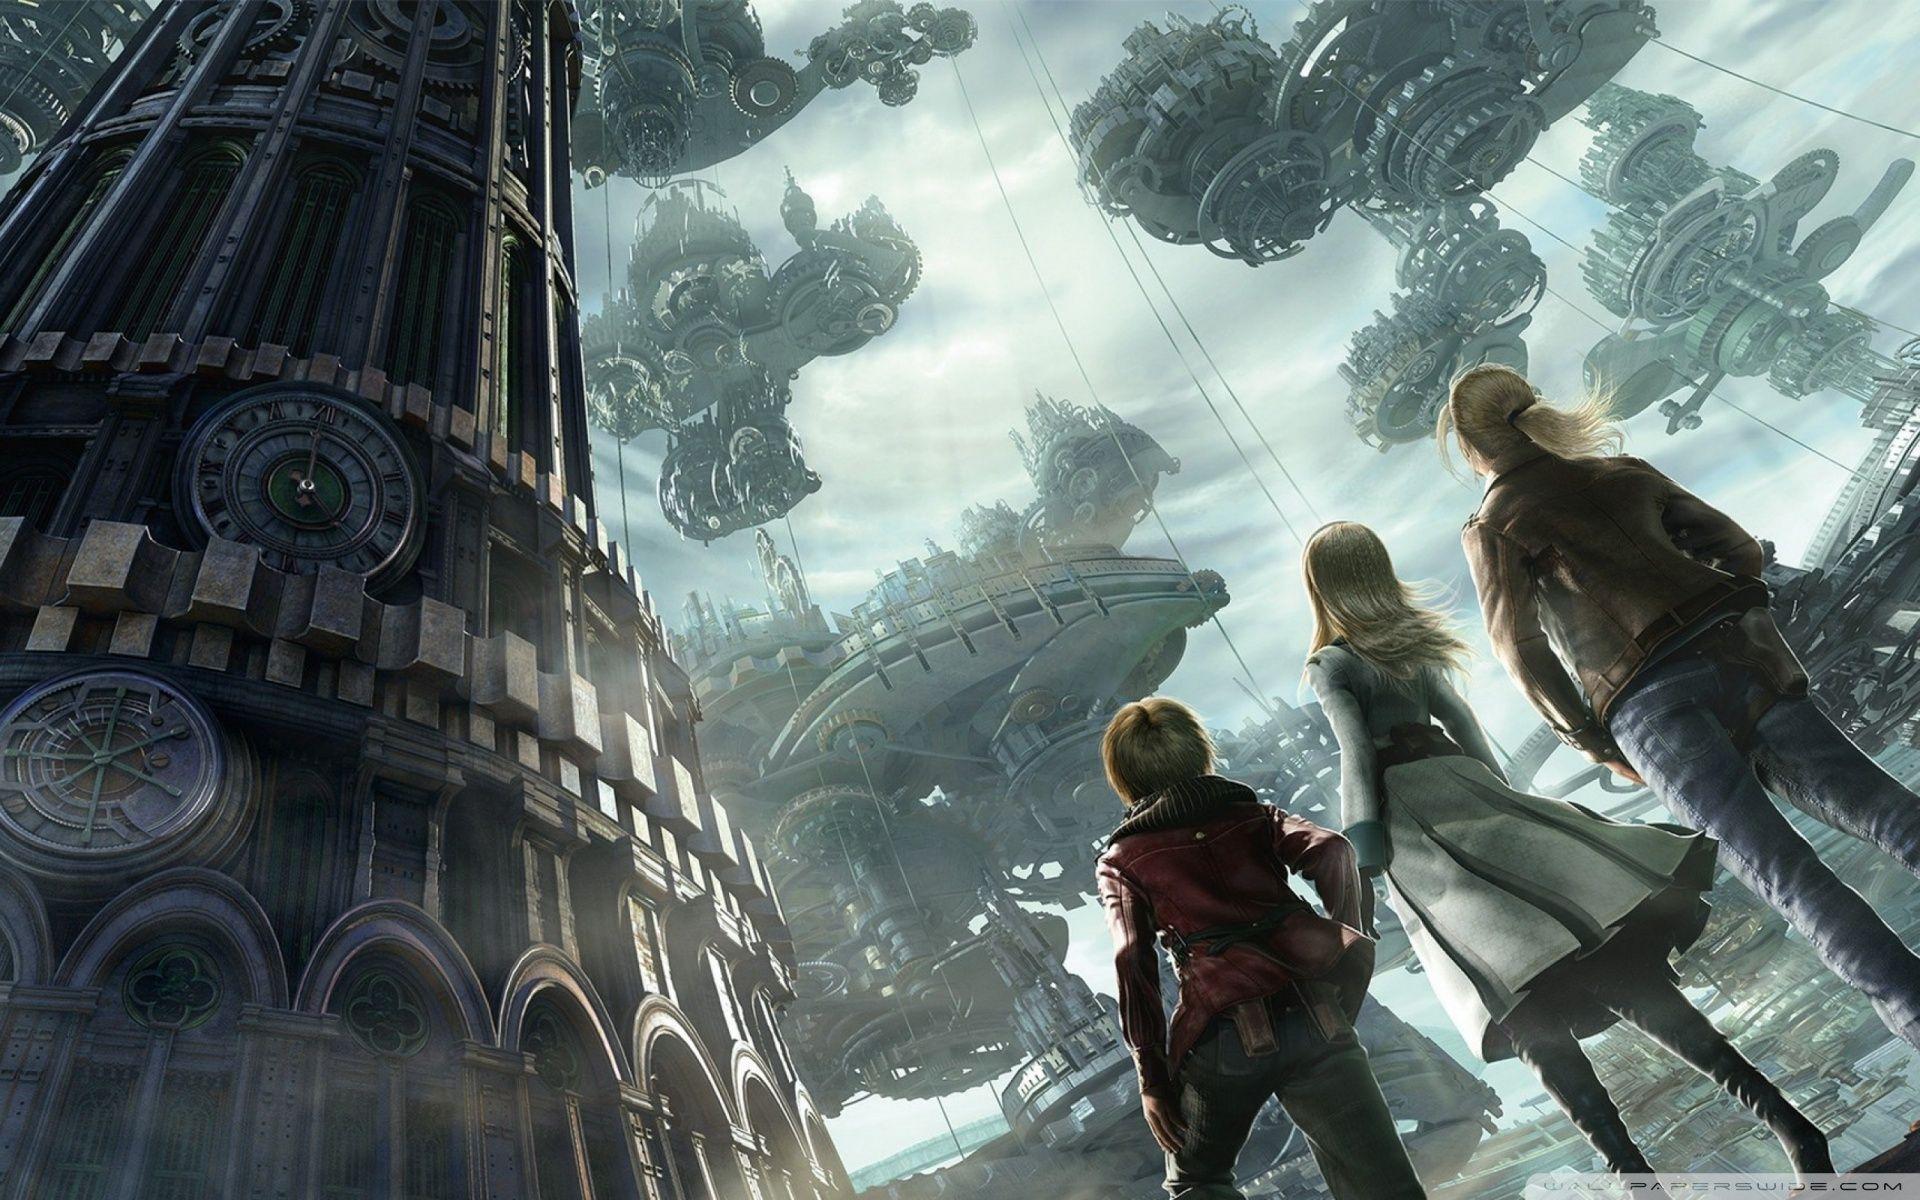 Resonance Of Fate (End Of Eternity) Ultra HD Desktop Background Wallpaper for 4K UHD TV, Multi Display, Dual Monitor, Tablet